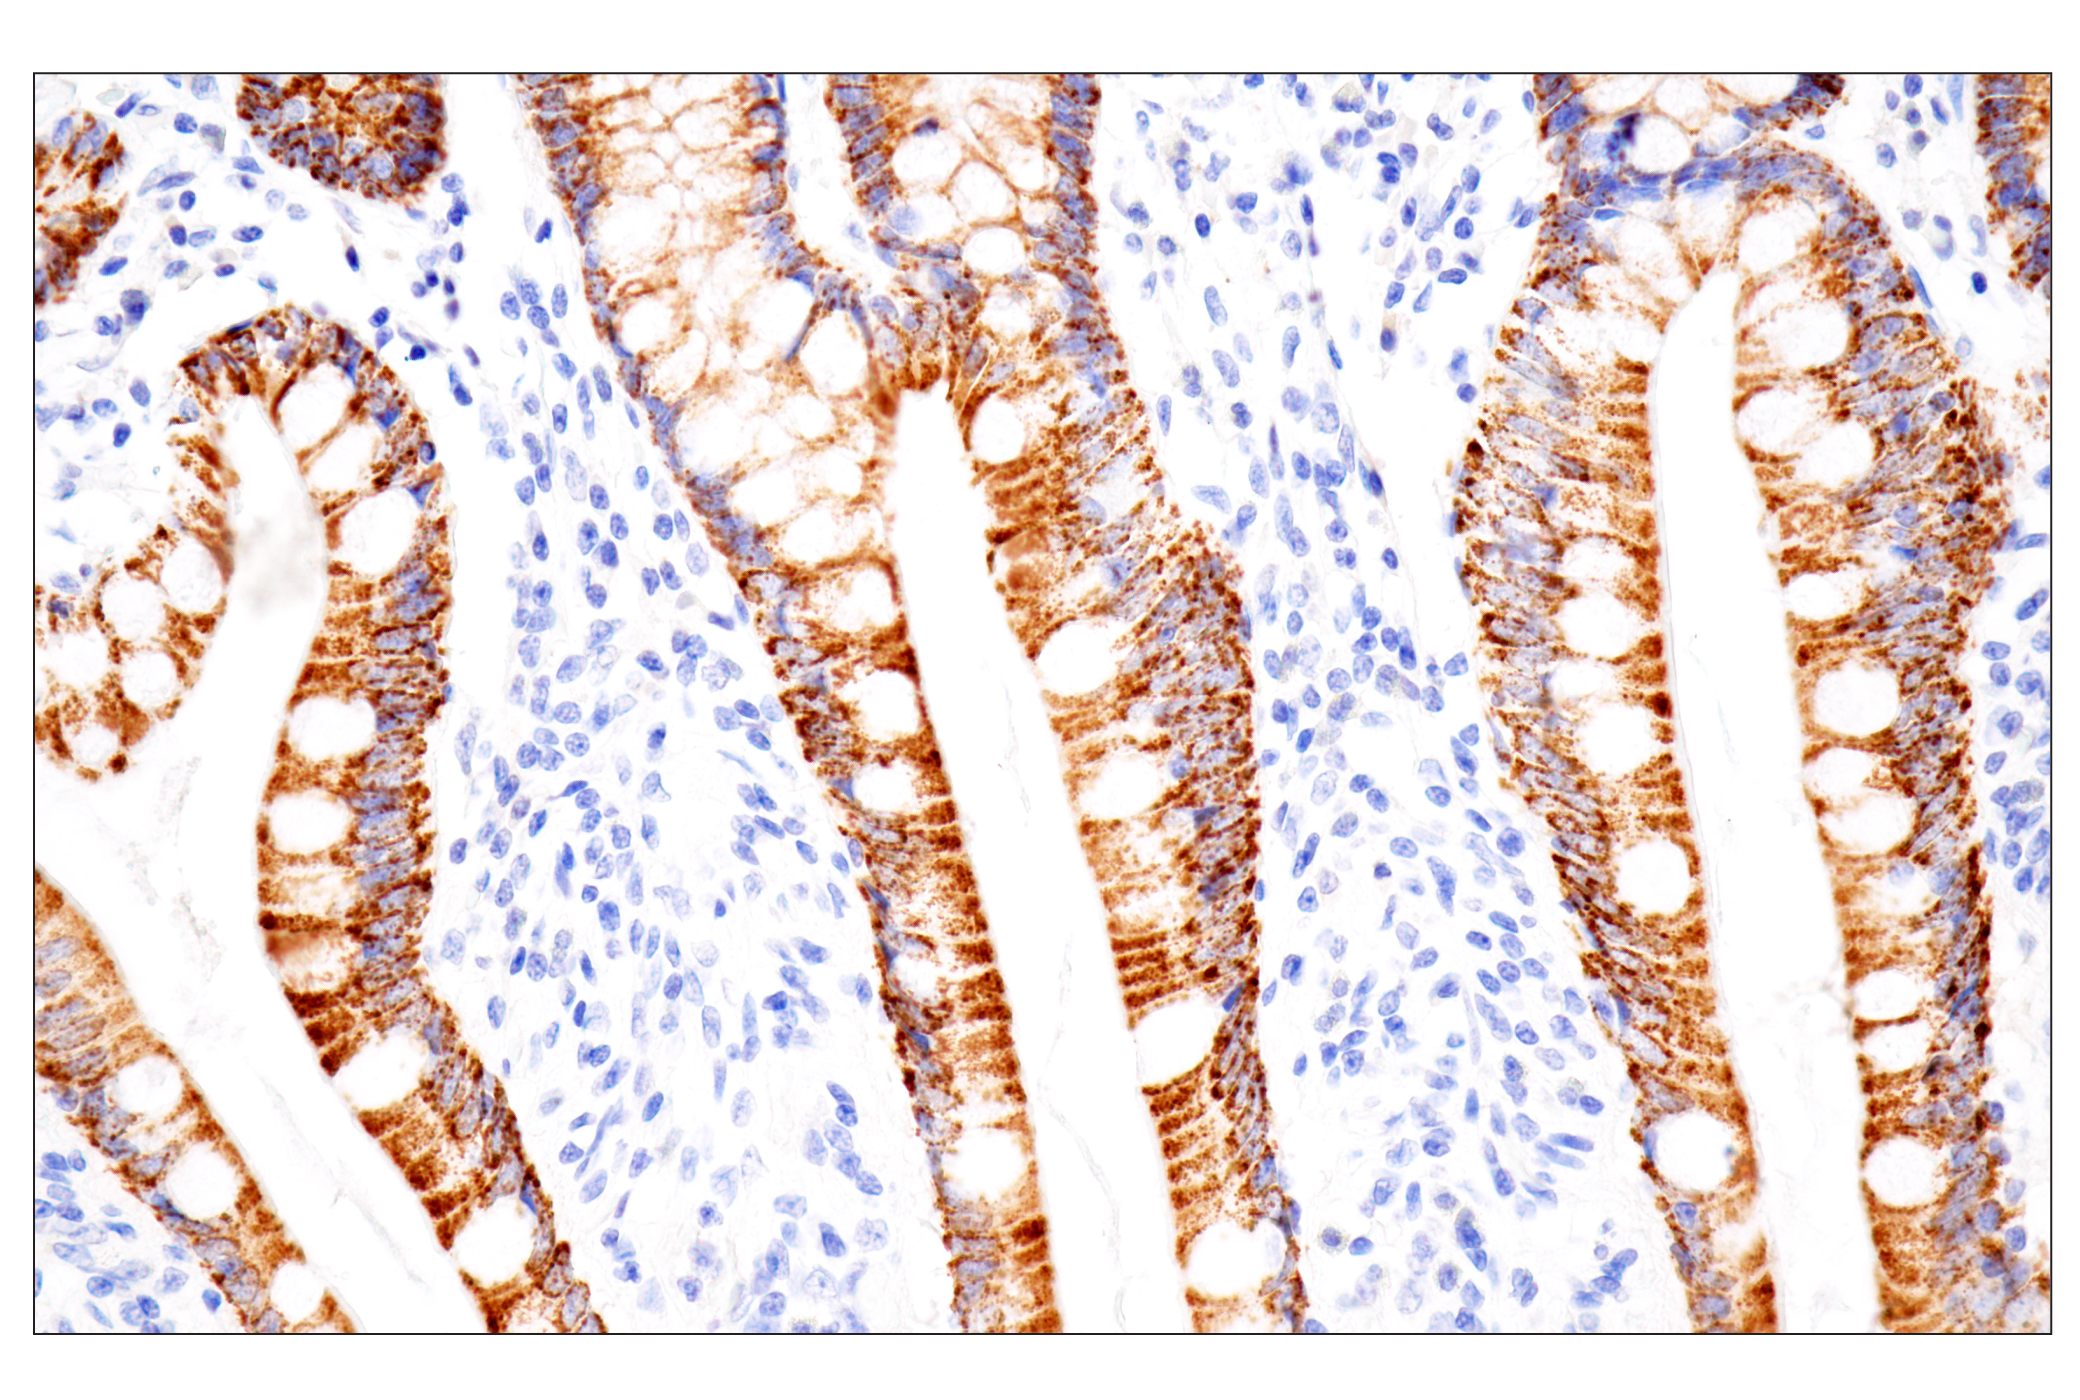 Immunohistochemistry Image 6: CPS1/Hep Par-1 (OCH1E5) Mouse mAb (Clone previously known as Hepatocyte Specific Antigen)